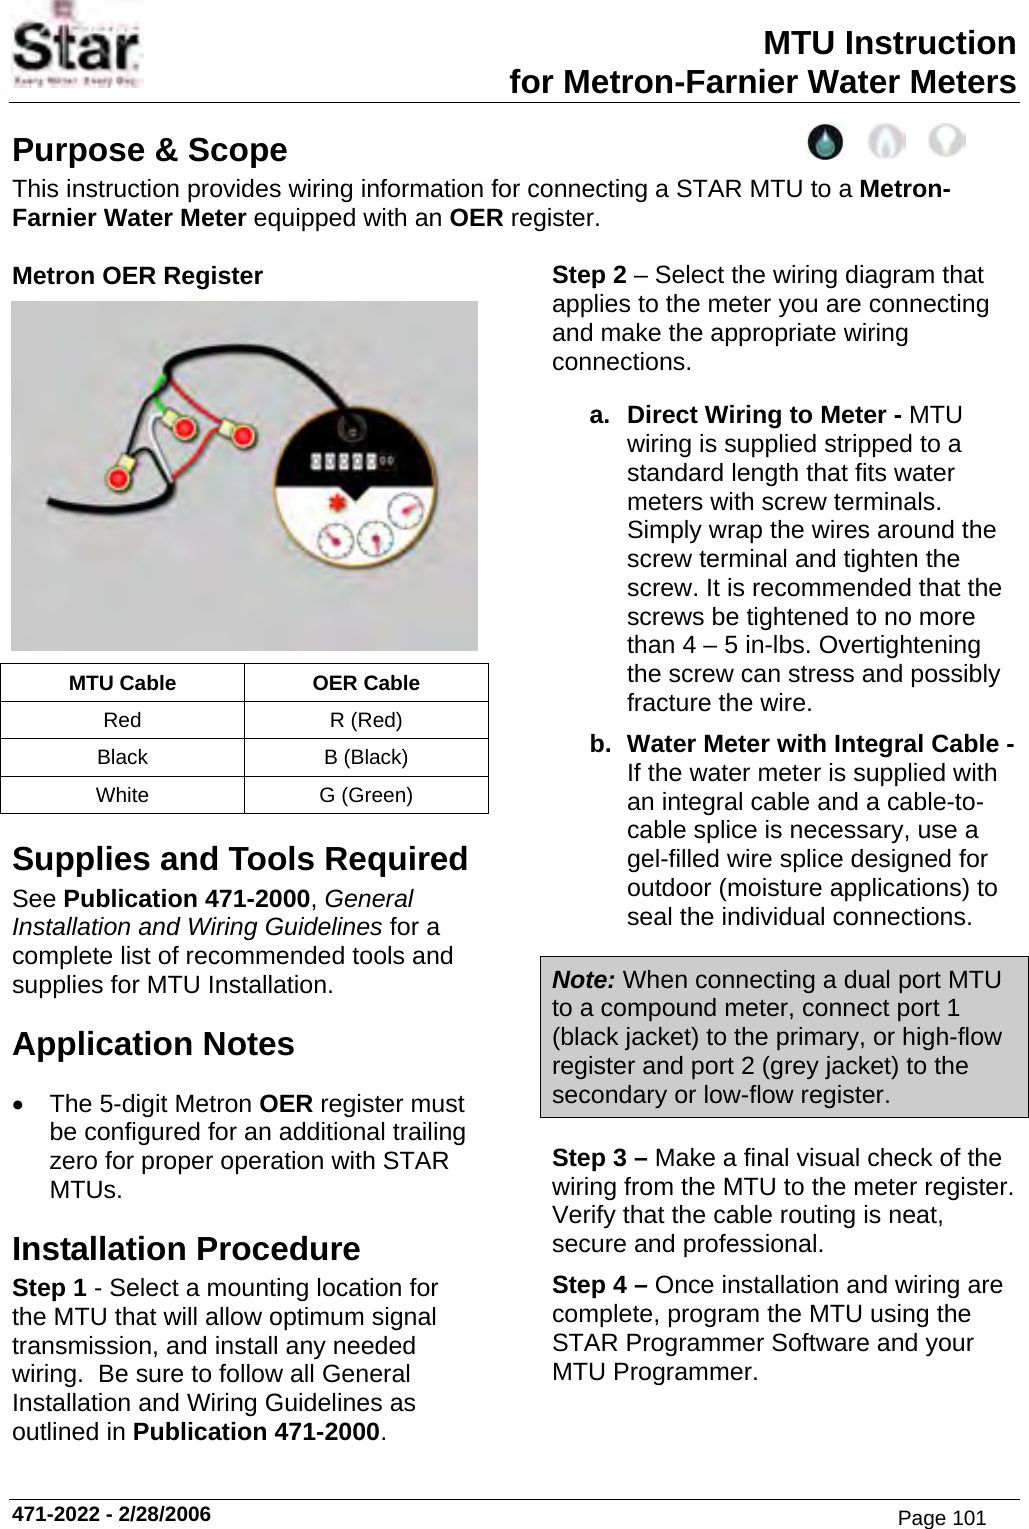 Page 101 of Aclara Technologies 09015 Transmitter for Meter Reading User Manual users manual